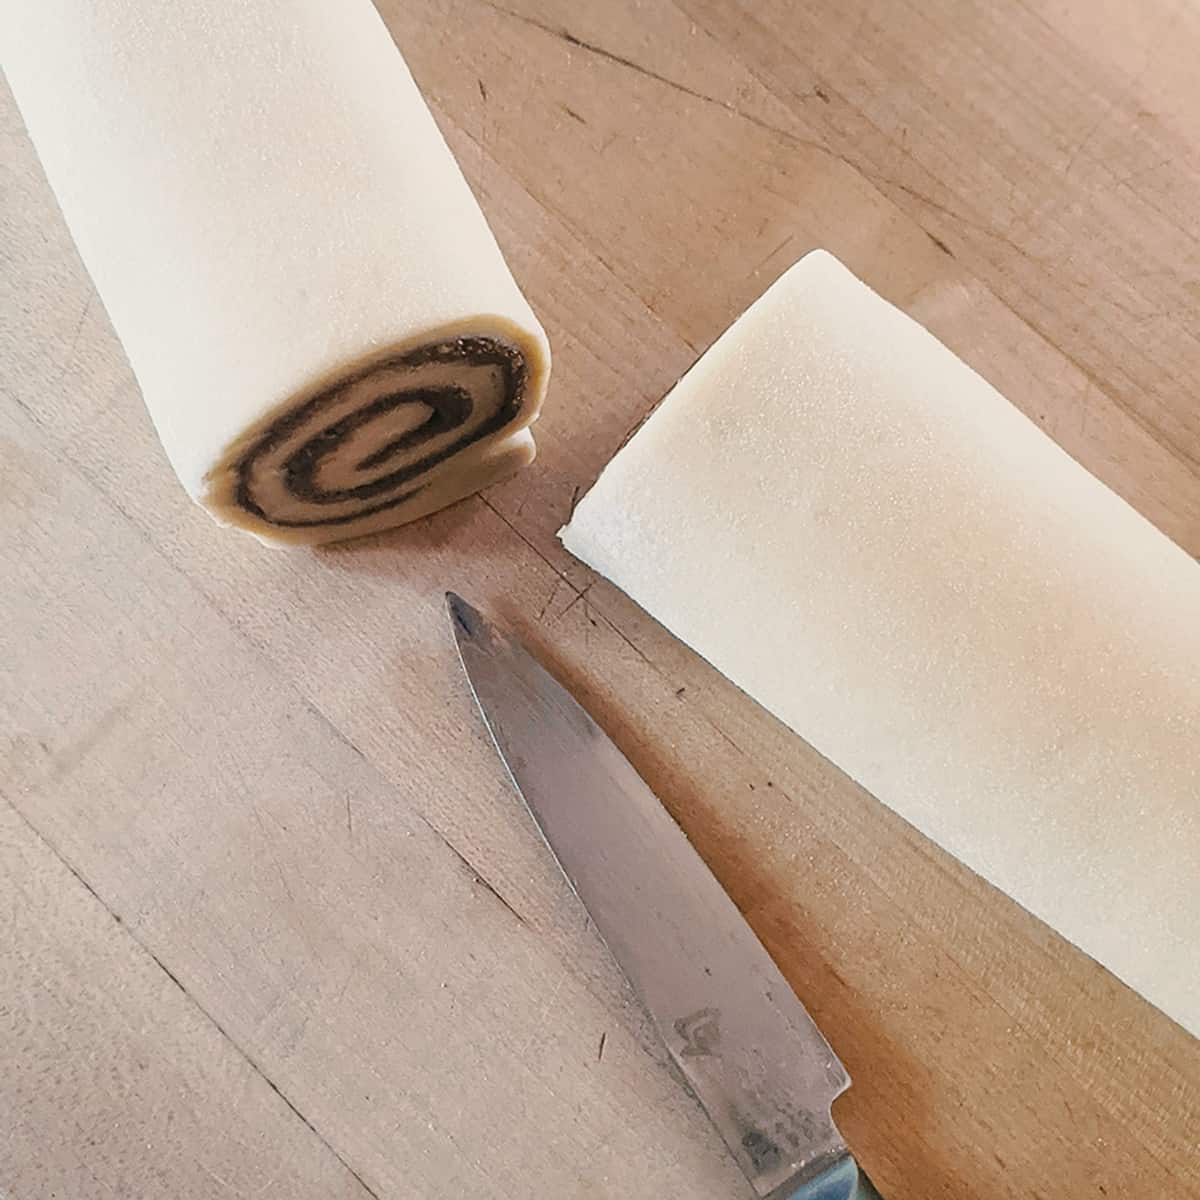 Simple Cinnamon Rolls - cutting the rolled dough